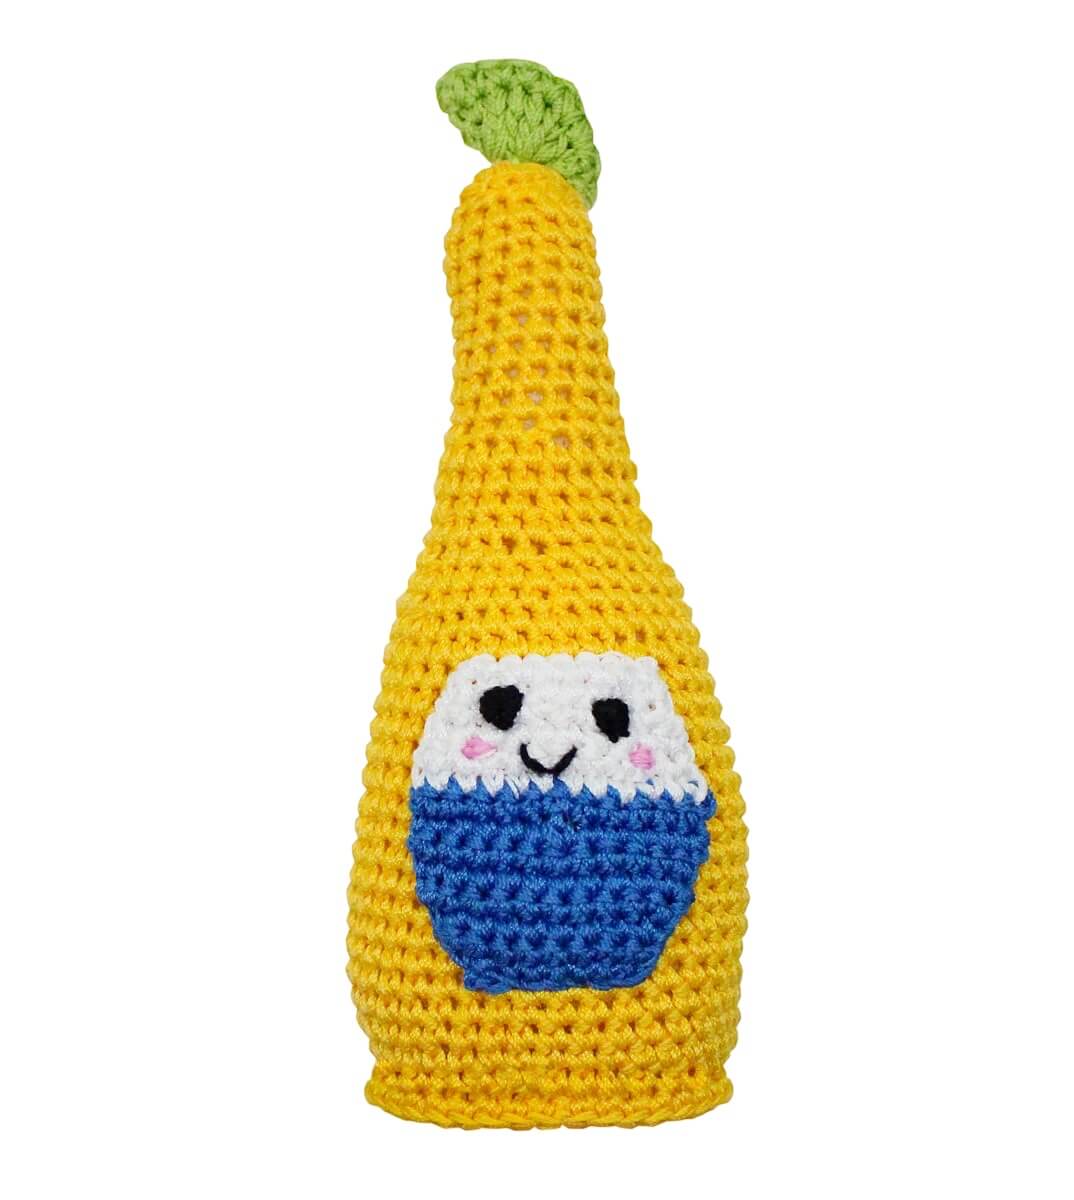 Knit Knacks "Beer Bottle With Lime" handmade organic cotton dog toy. Yellow anthropomorphic beer bottle with a happy expression, rosy cheeks and a lime on the top of the bottle.